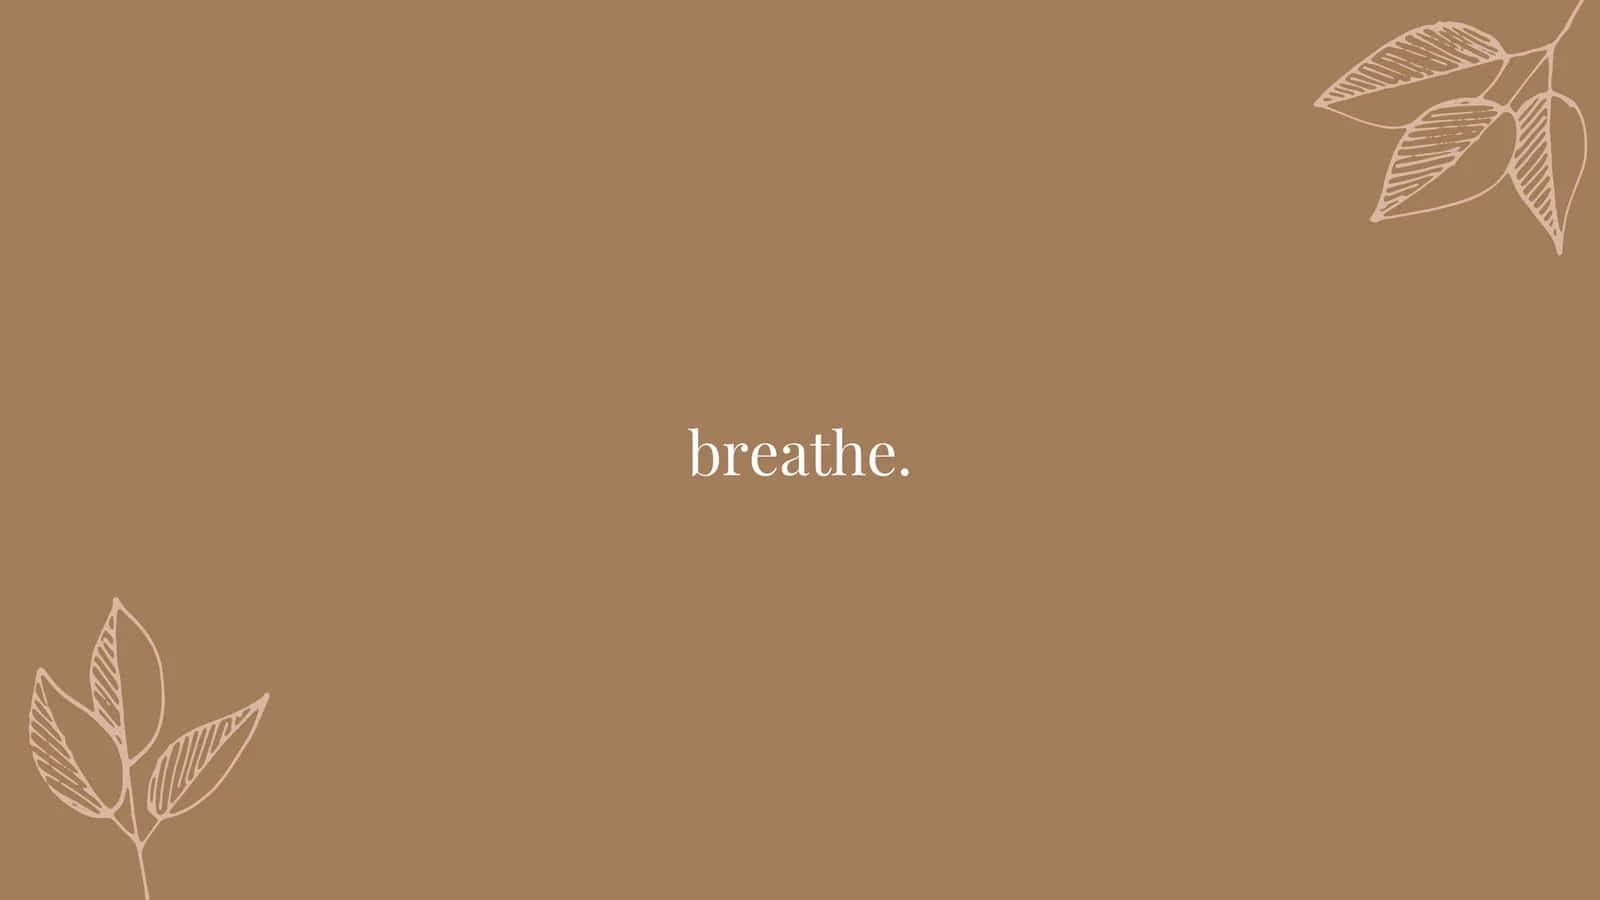 Breathe - A Beige Background With Leaves